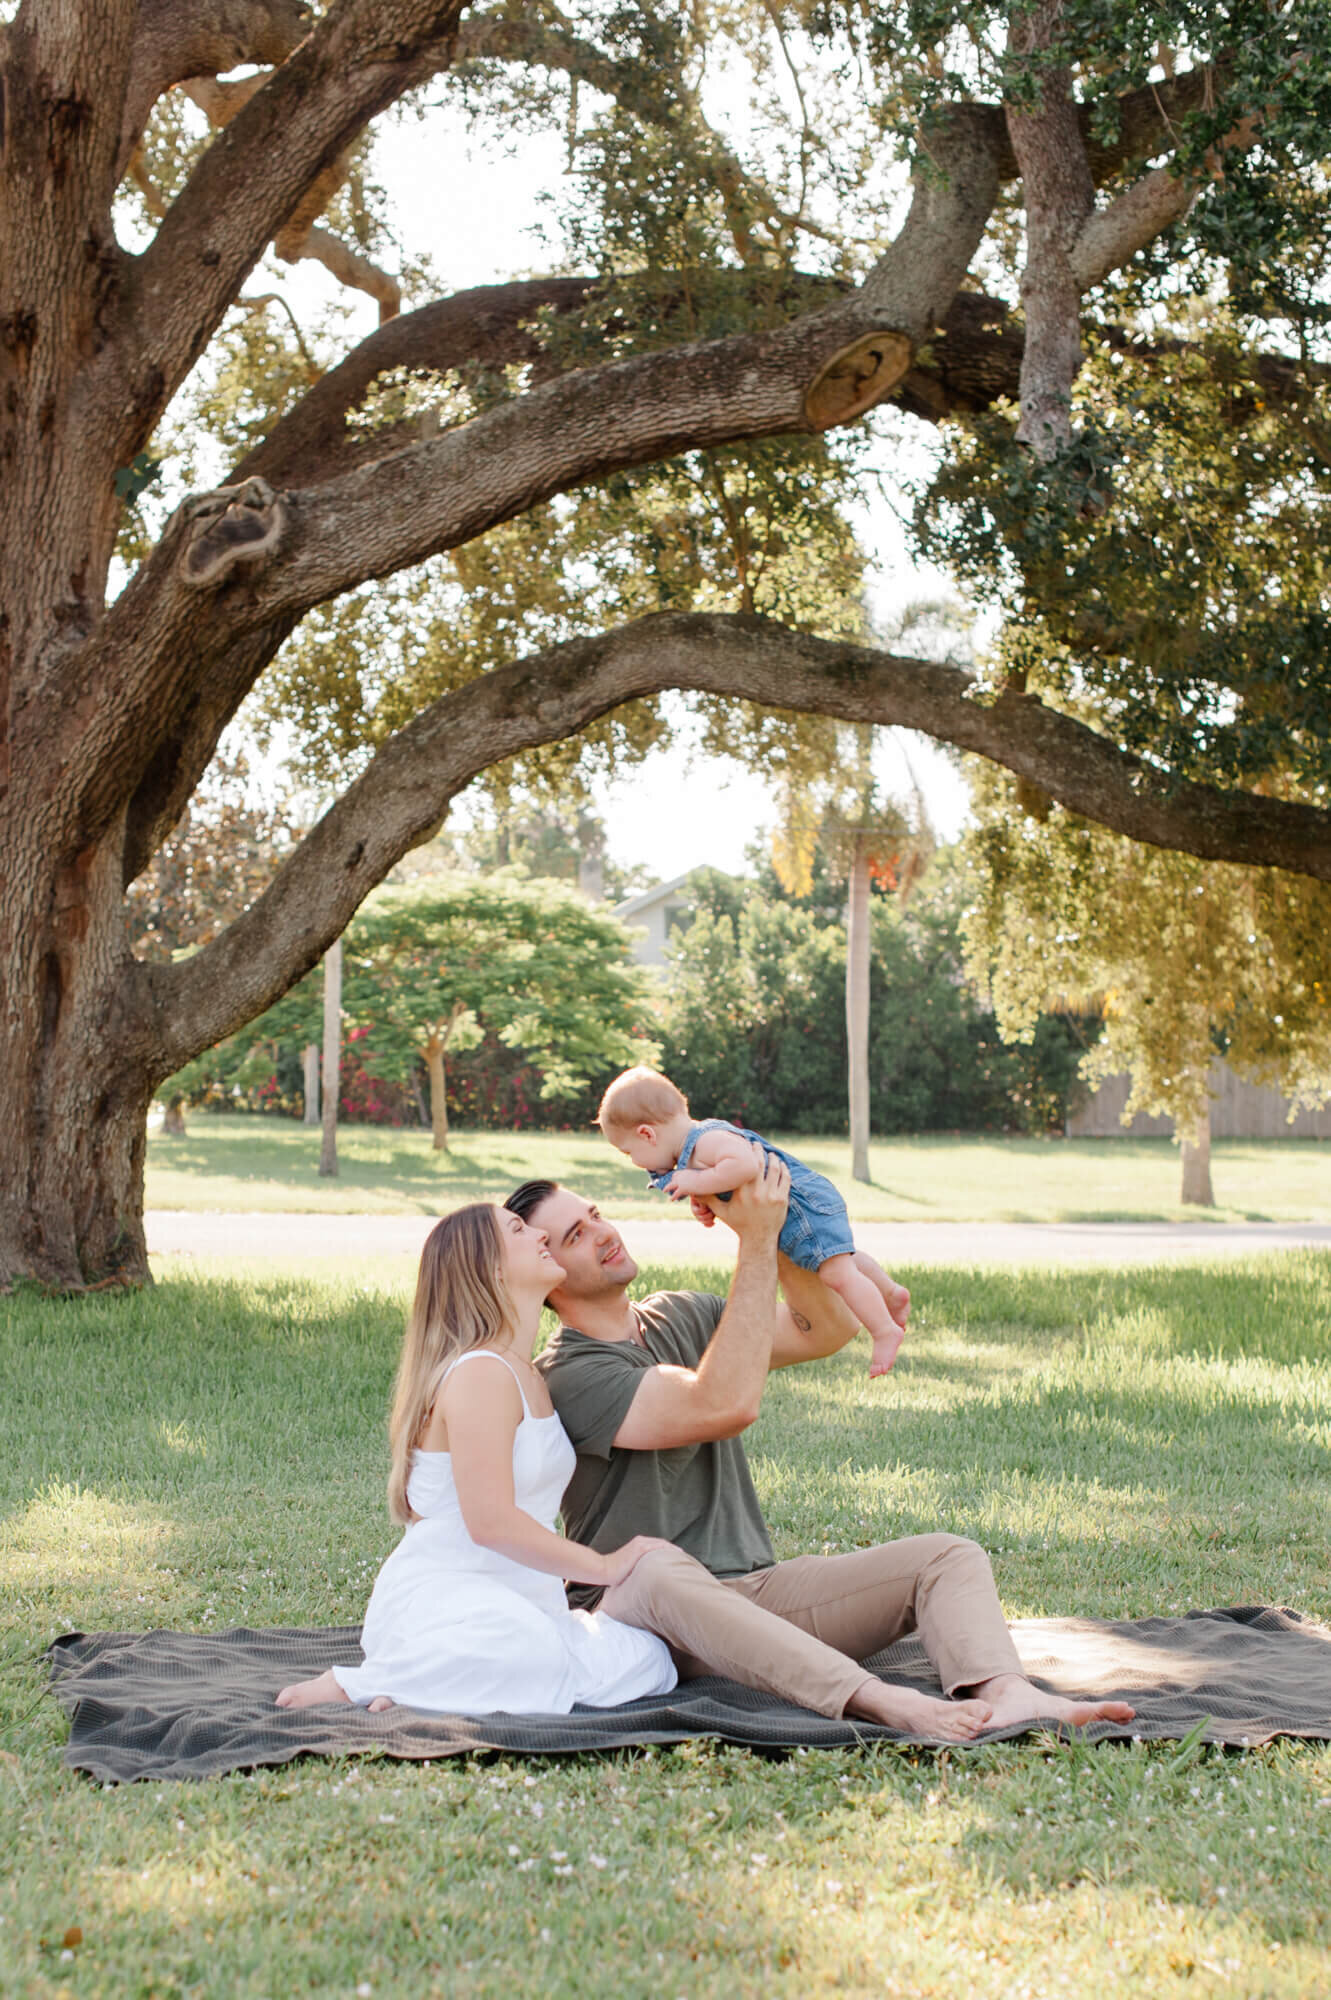 Family sits underneath an oak tree and holds their son in the air